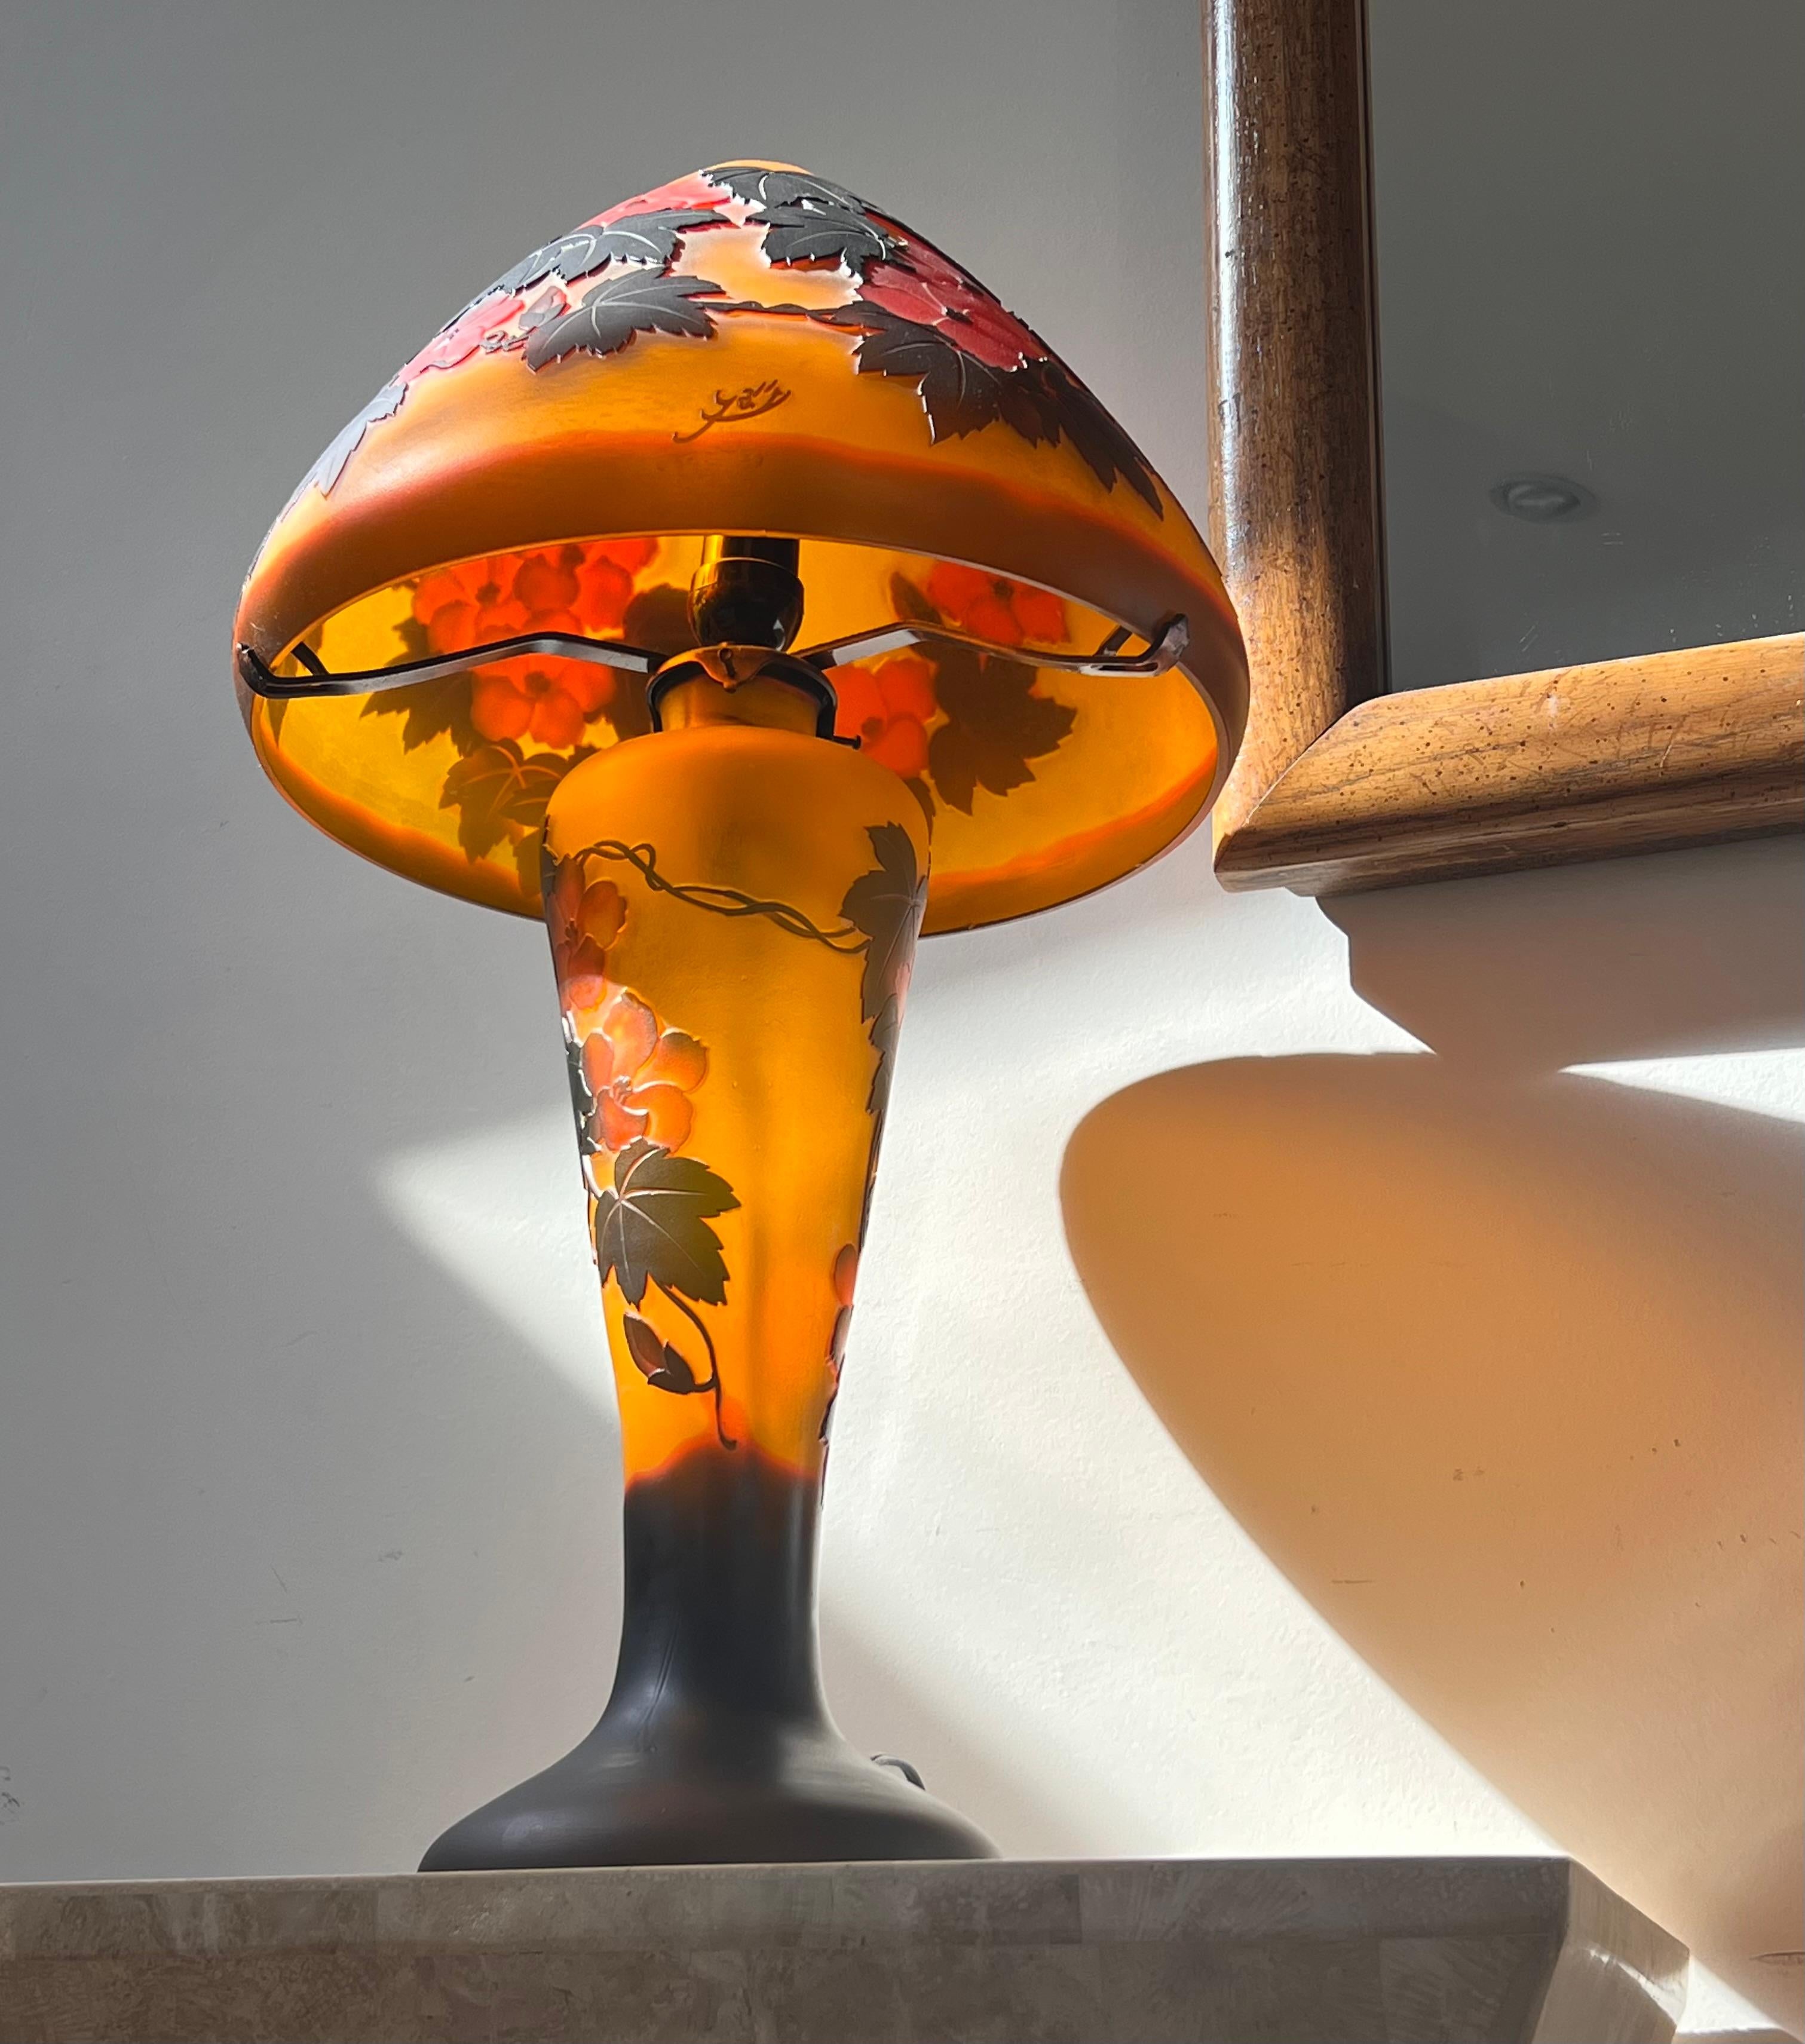 Art Nouveau cameo glass table lamp after Gallé, signed, circa 1975 im Zustand „Gut“ im Angebot in View Park, CA